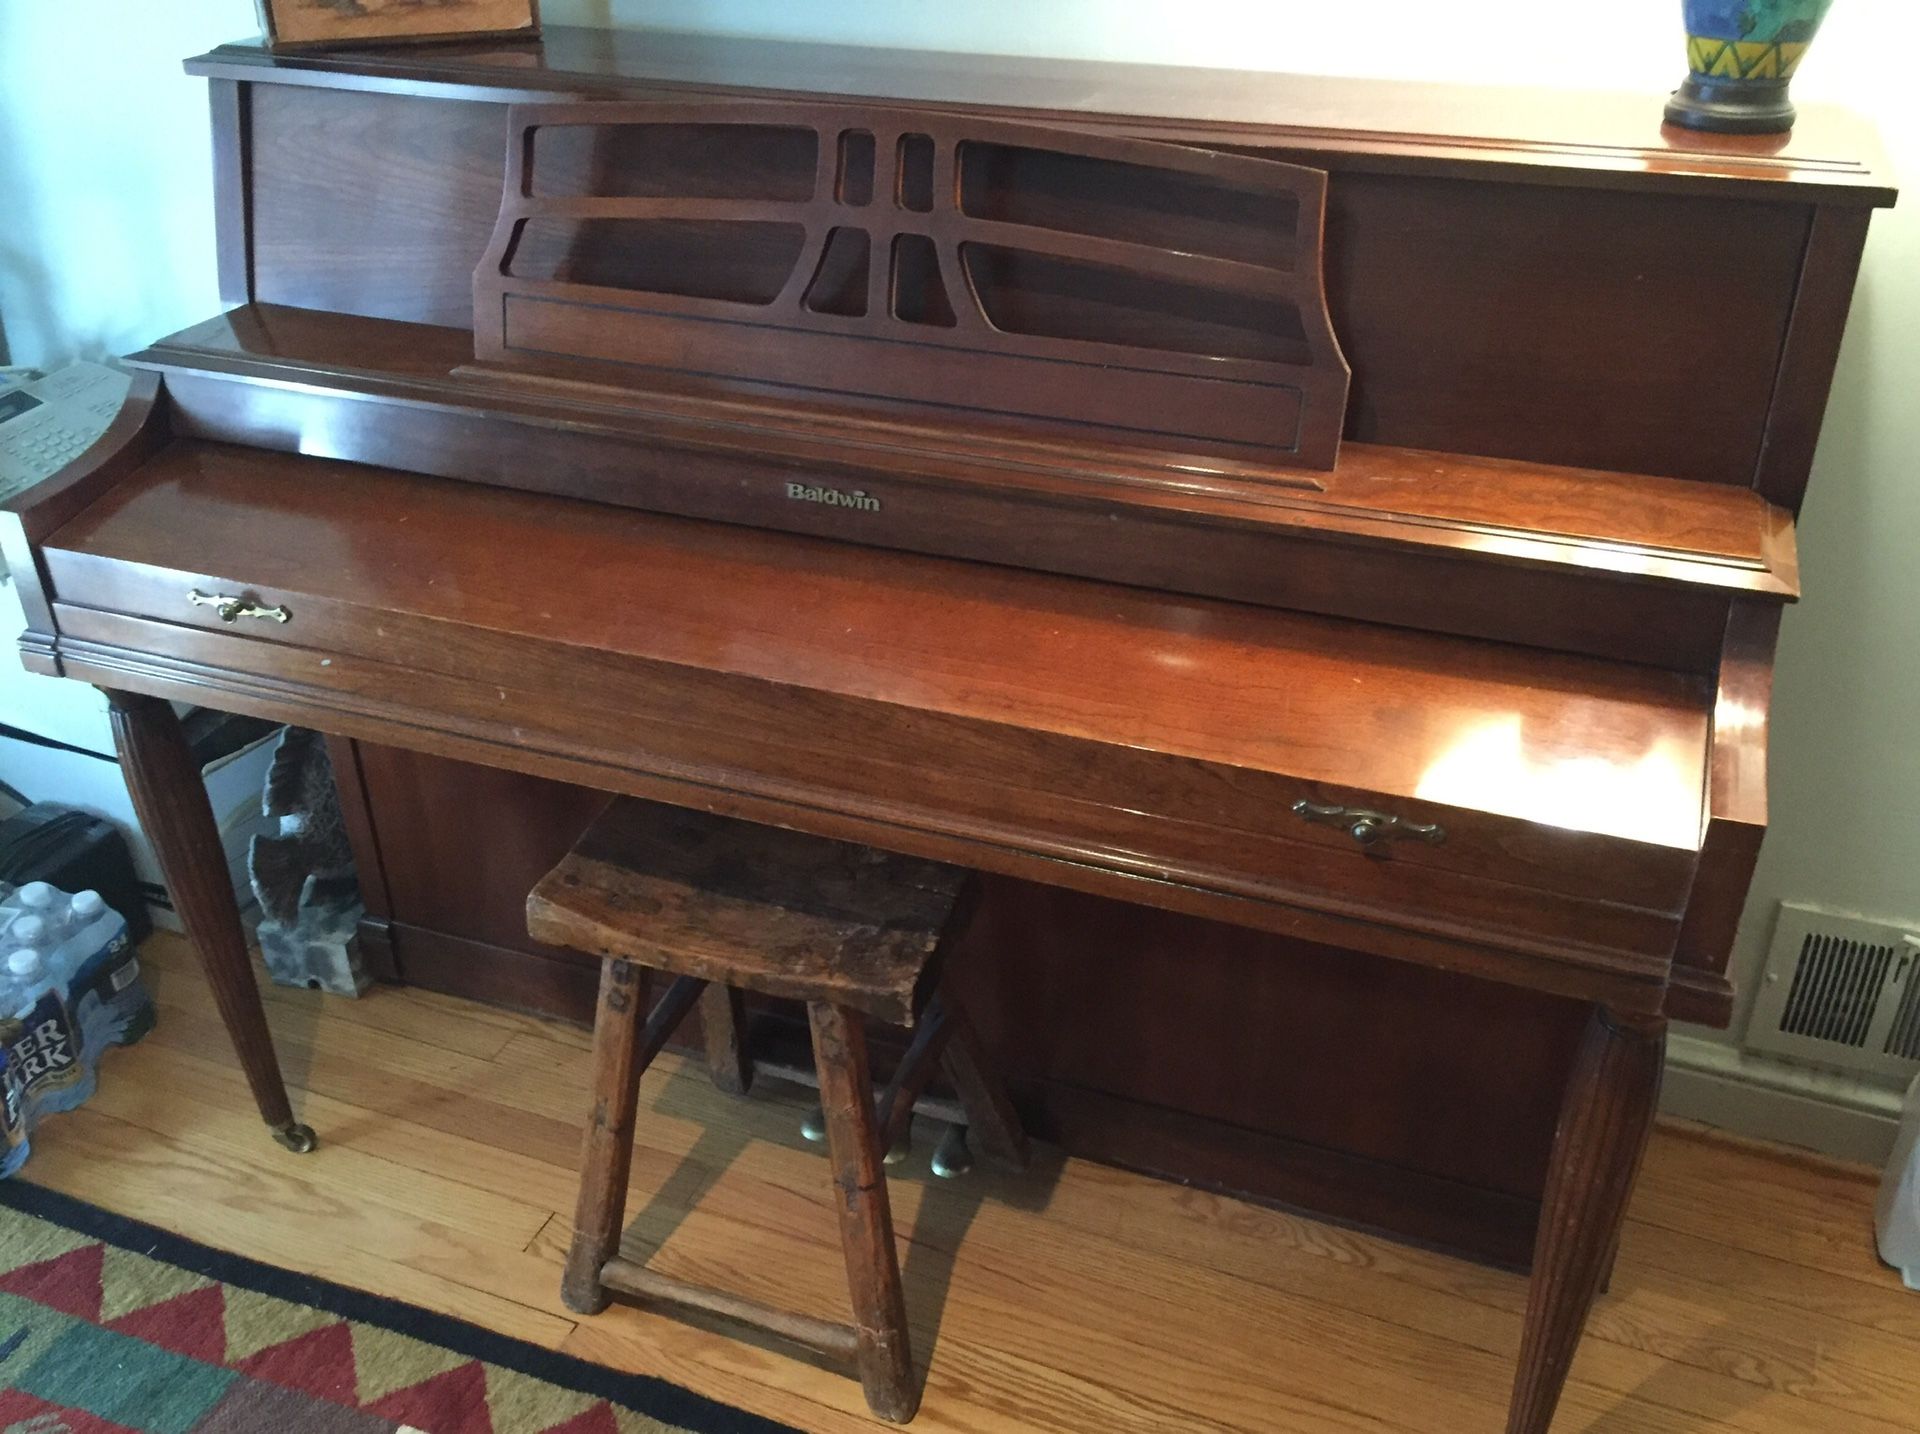 Baldwin Cherry piano. We moved and brought the piano with us, but it's time to sell. Great time to focus on learning to play while stuck indoors.